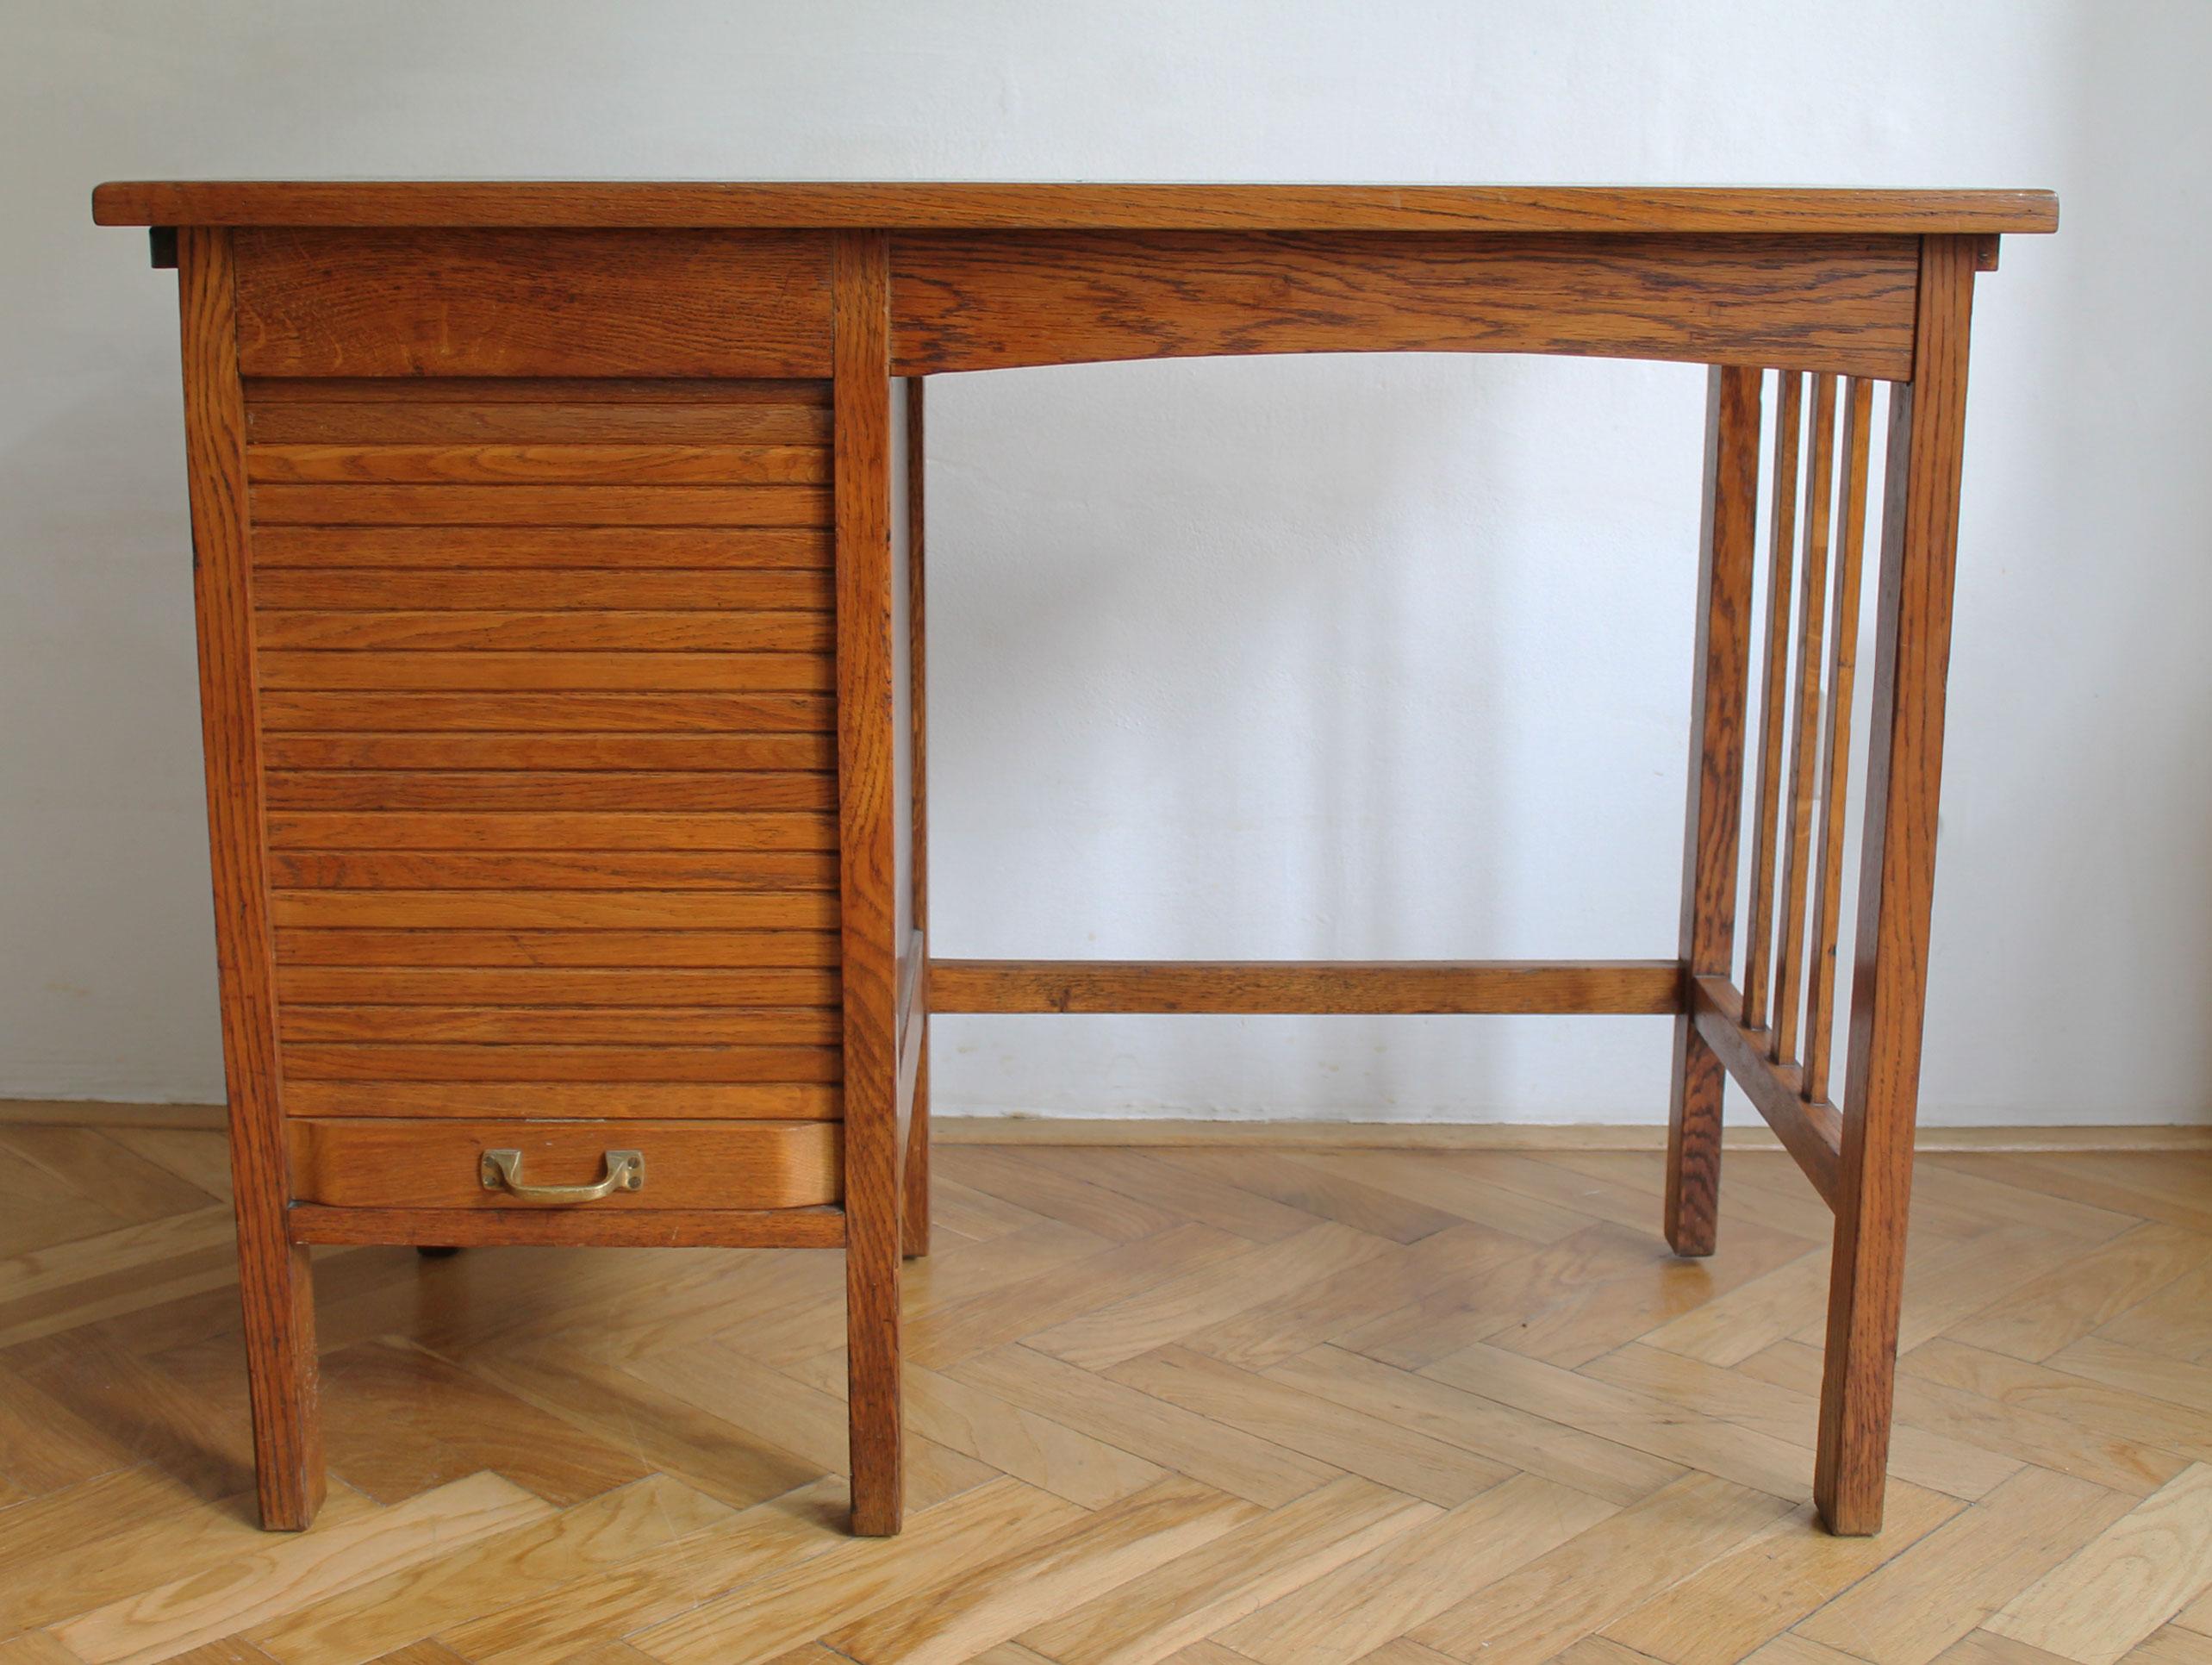 This is an original solid oak child’s desk from the 1930’s. It was designed by the Jerry Furniture Company in America and was sold by Karel Vagner Furniture store in Brno (who gained exclusive licence for the Jerry desks and tables) in former